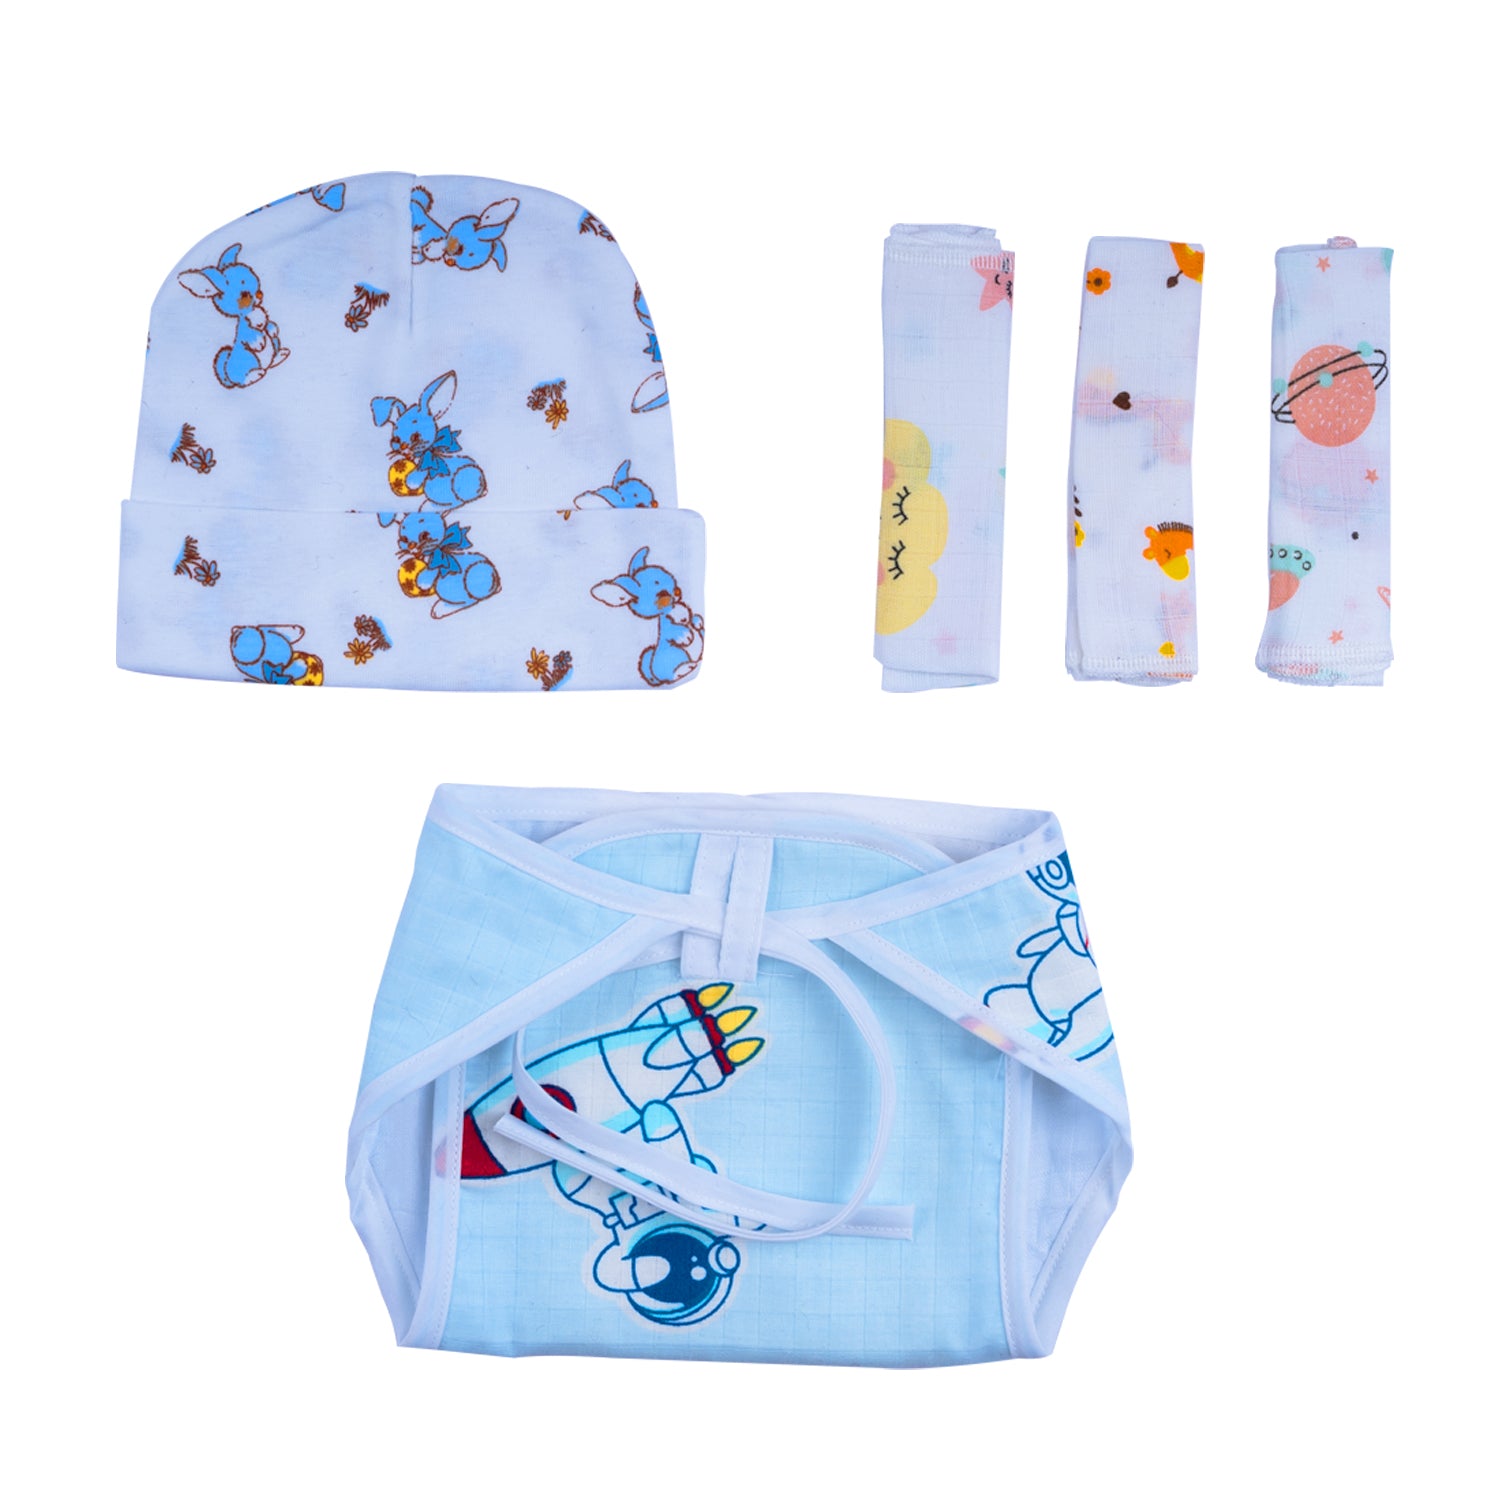 Baby Moo Astronaut In Space Infant Essentials 10 Pcs Muslin Clothing Gift Set - Multicolour